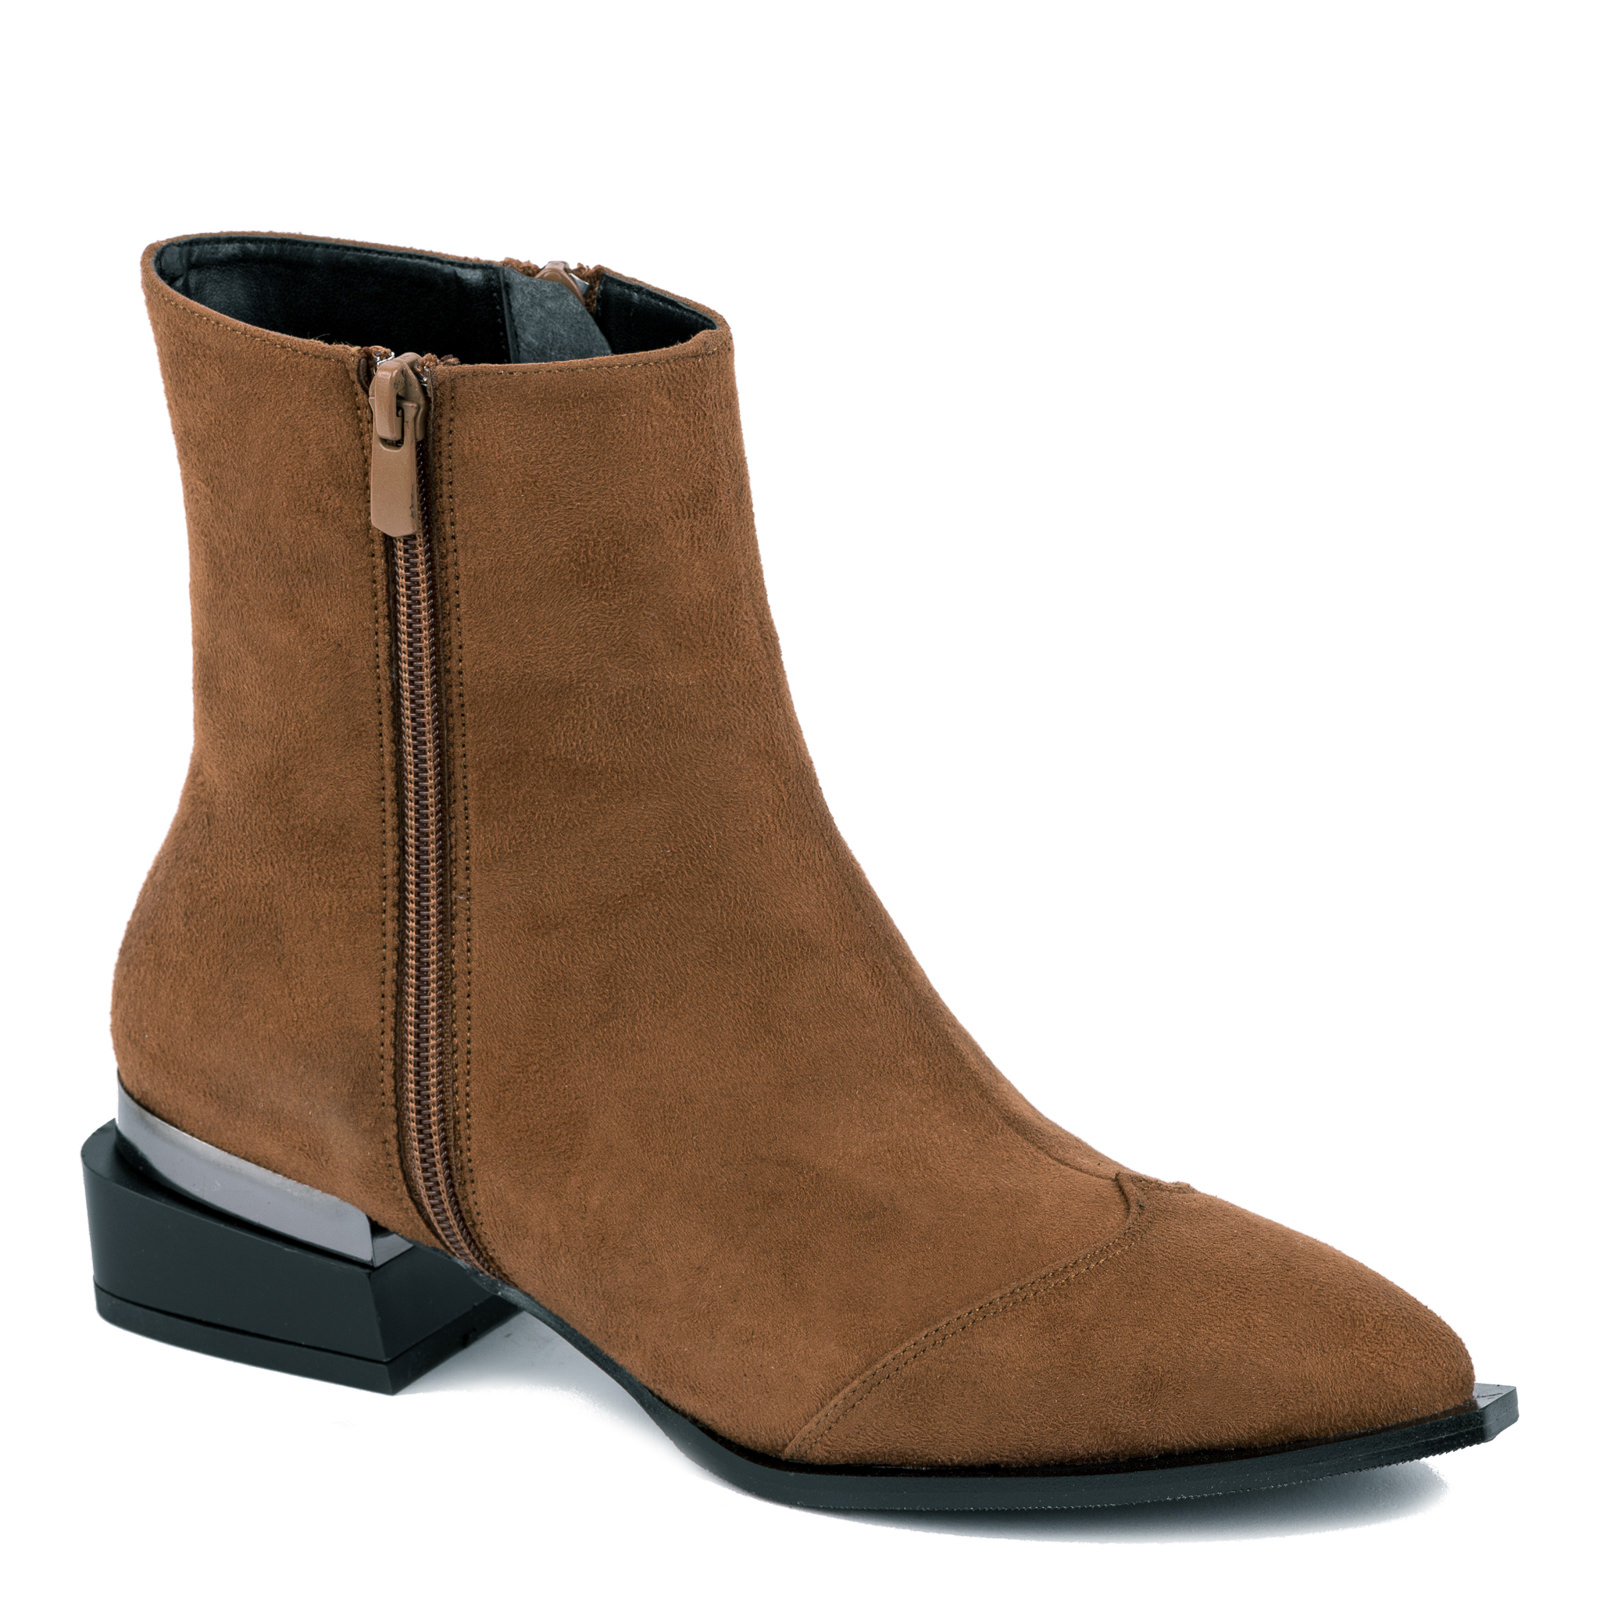 VELOUR ANKLE BOOTS WITH ZIPPER - CAMEL 